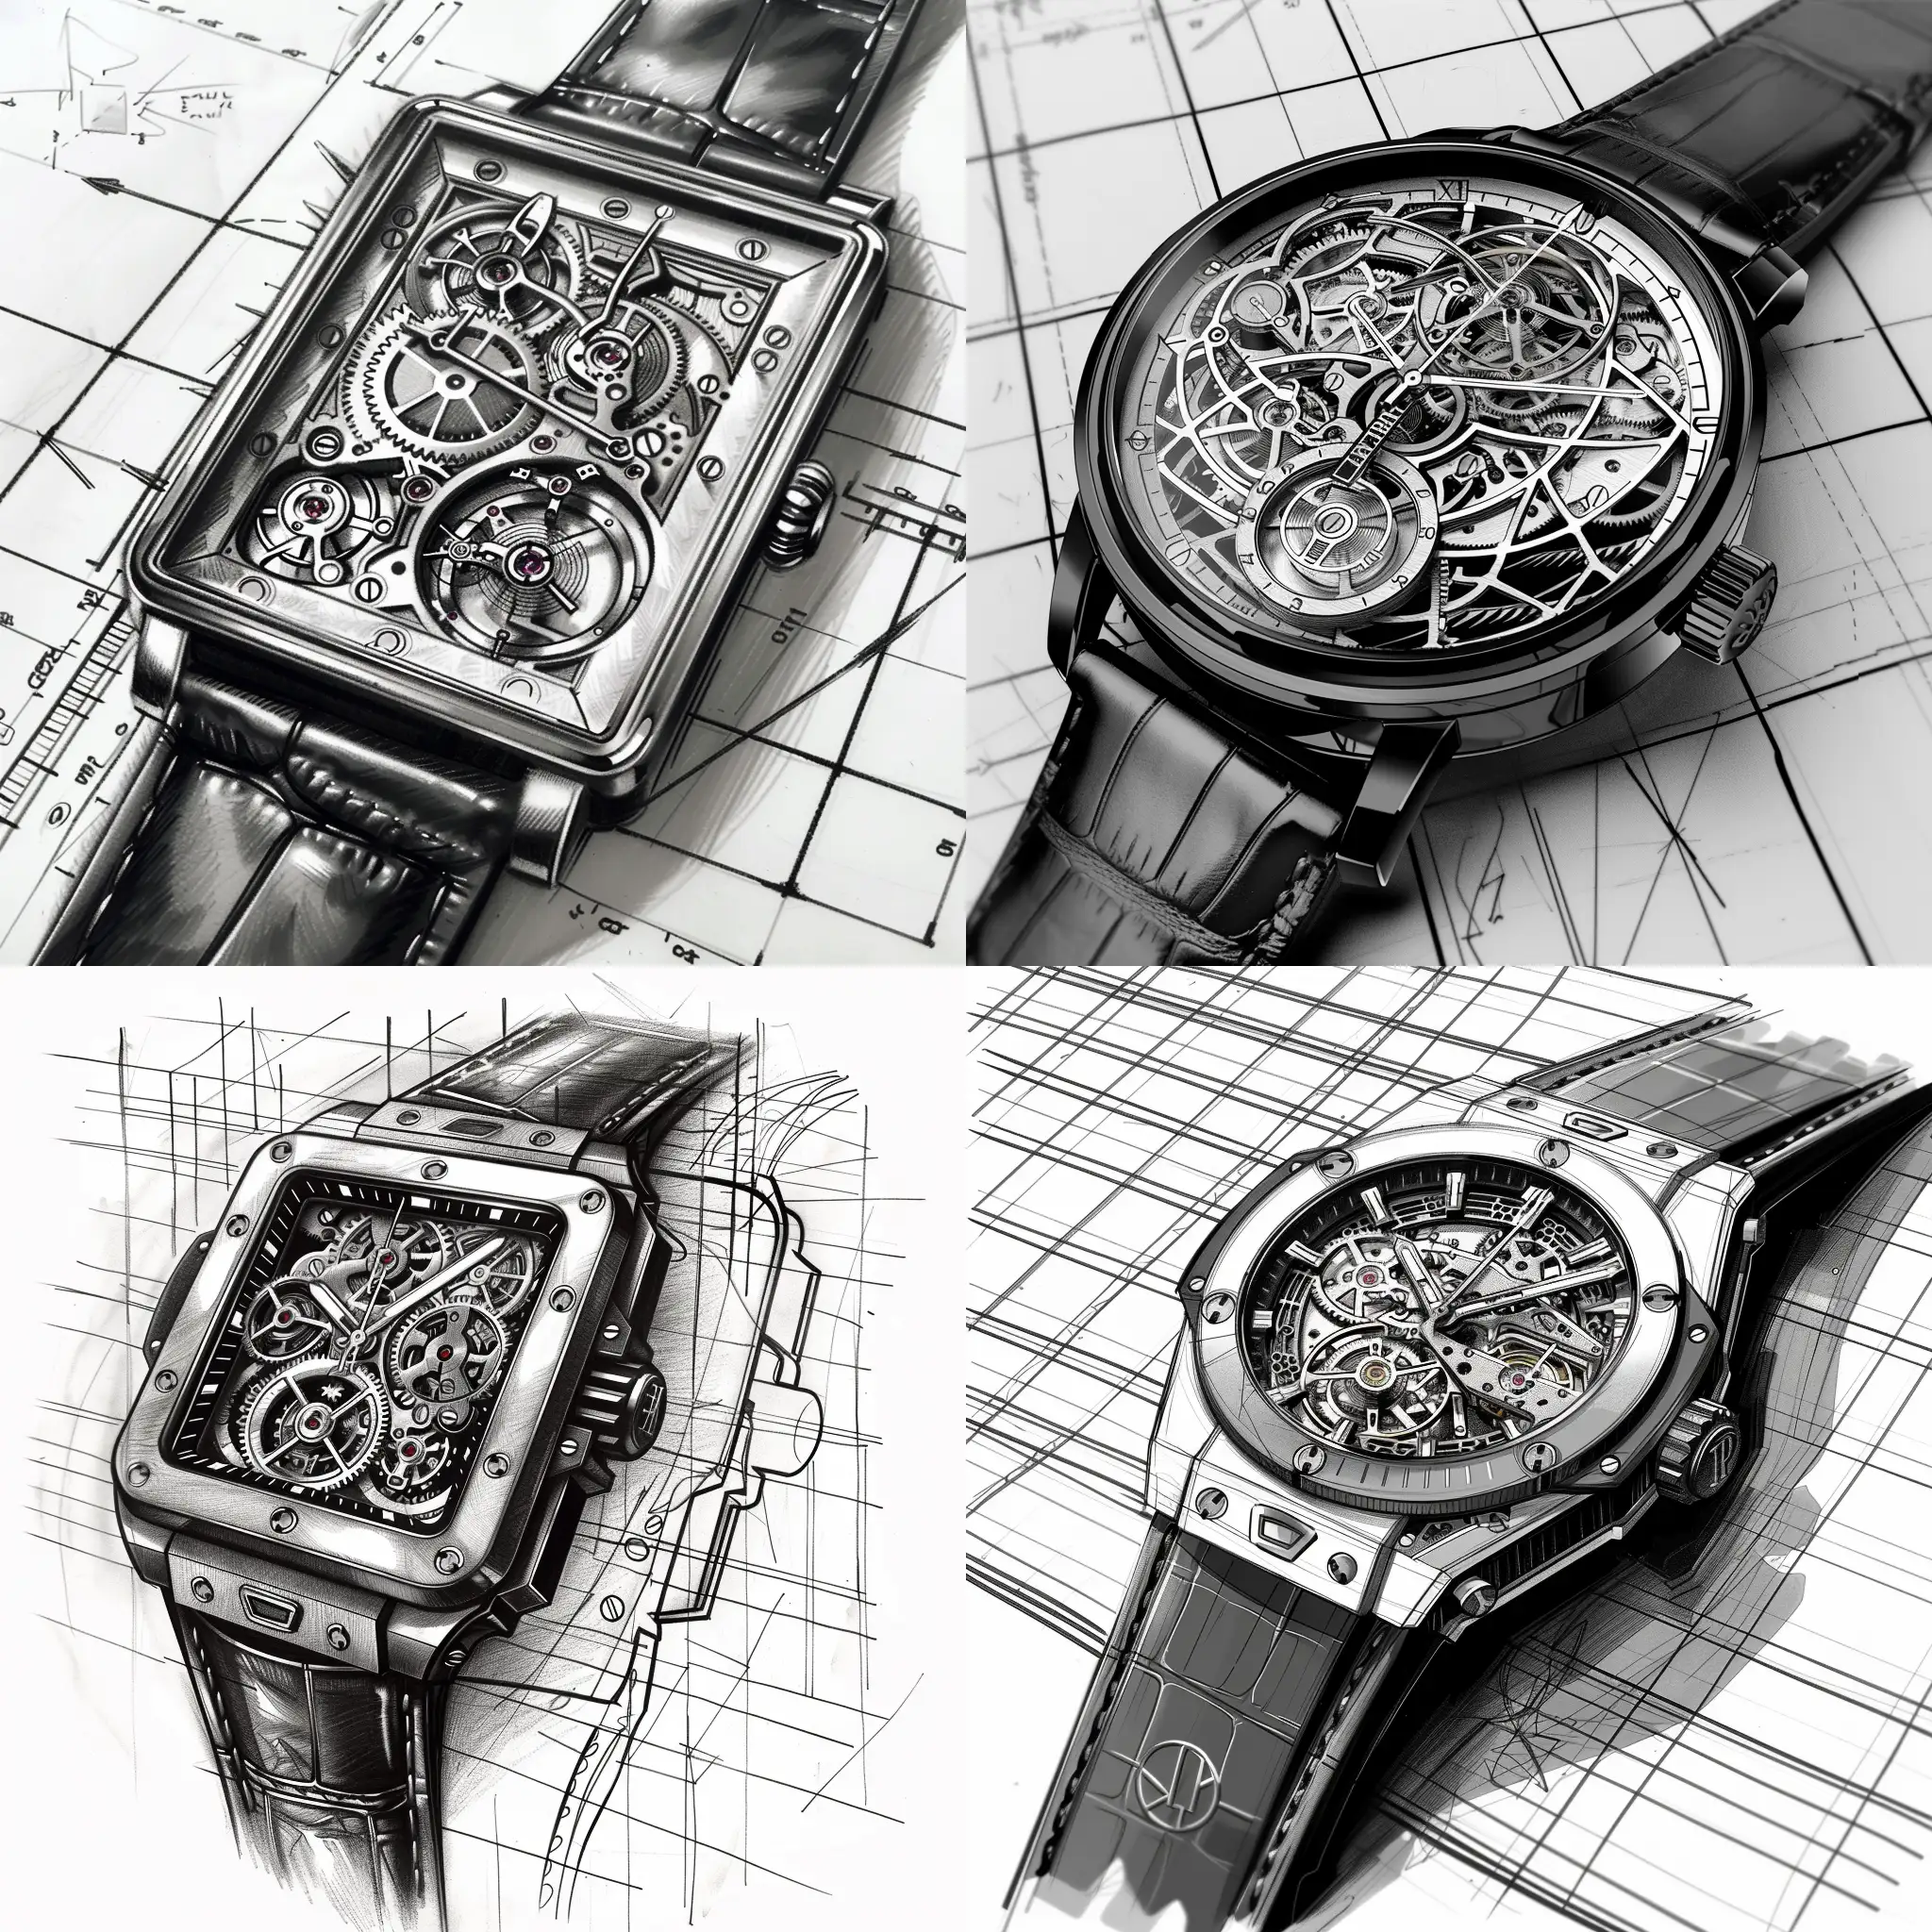 Luxury-Wristwatch-Technical-Drawing-Intricate-Gears-and-Springs